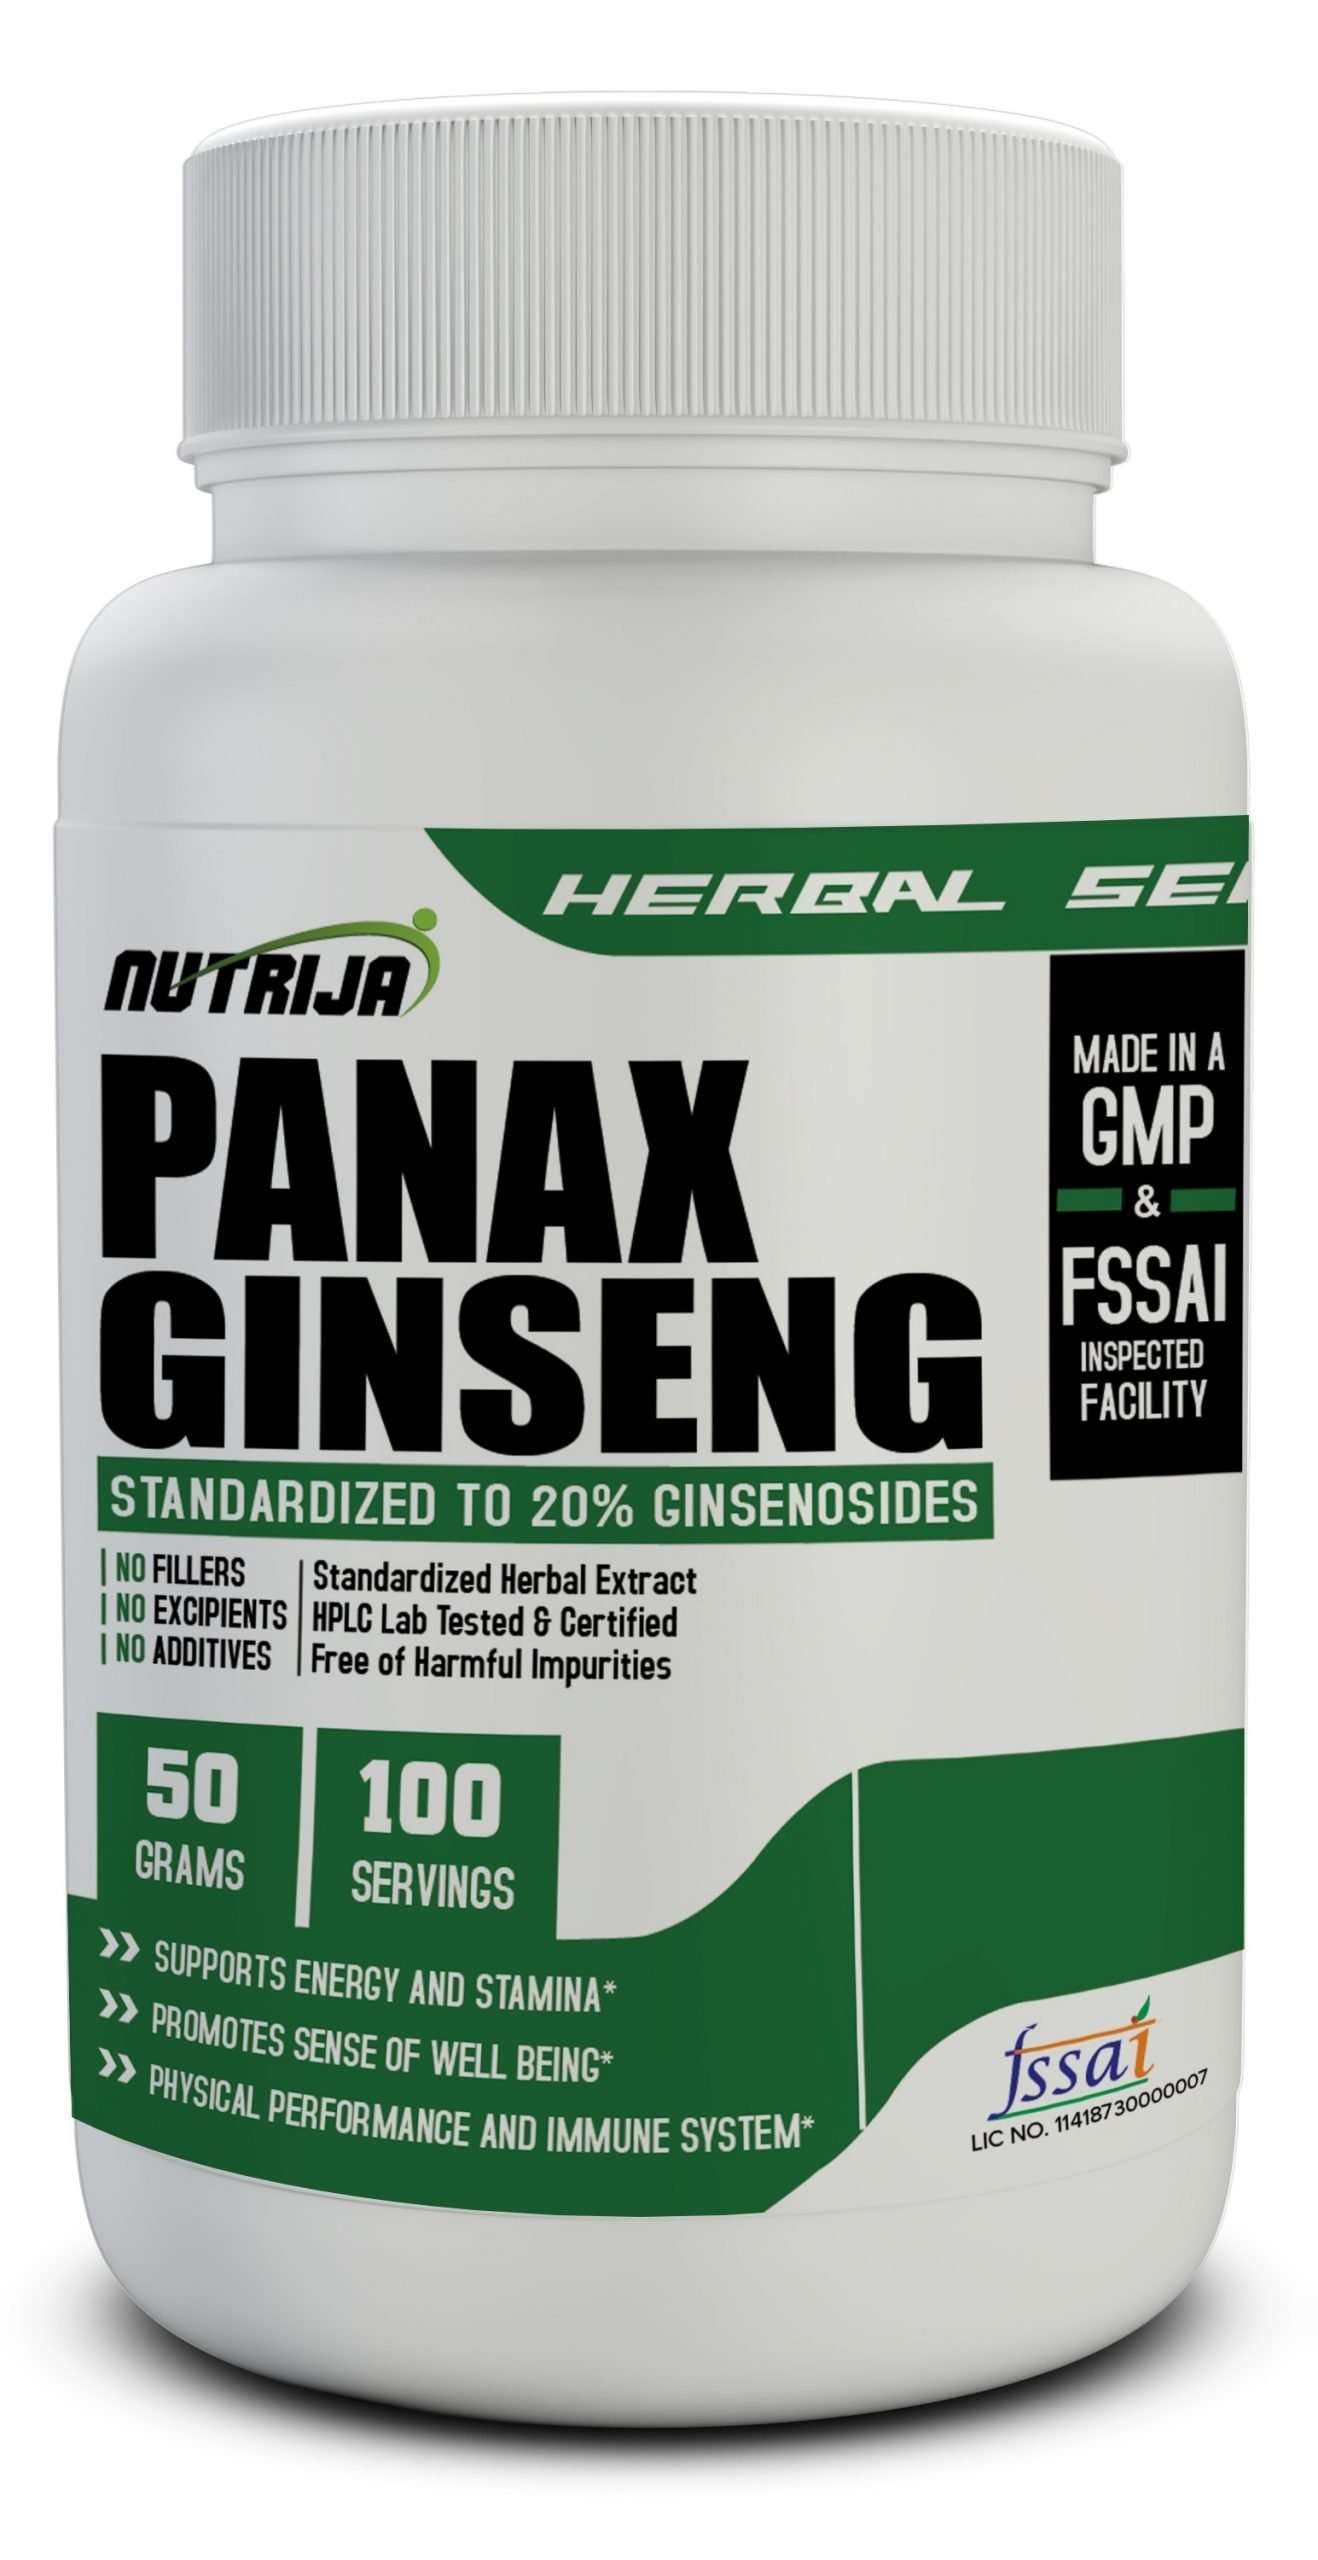 Buy Panax Ginseng Online in India